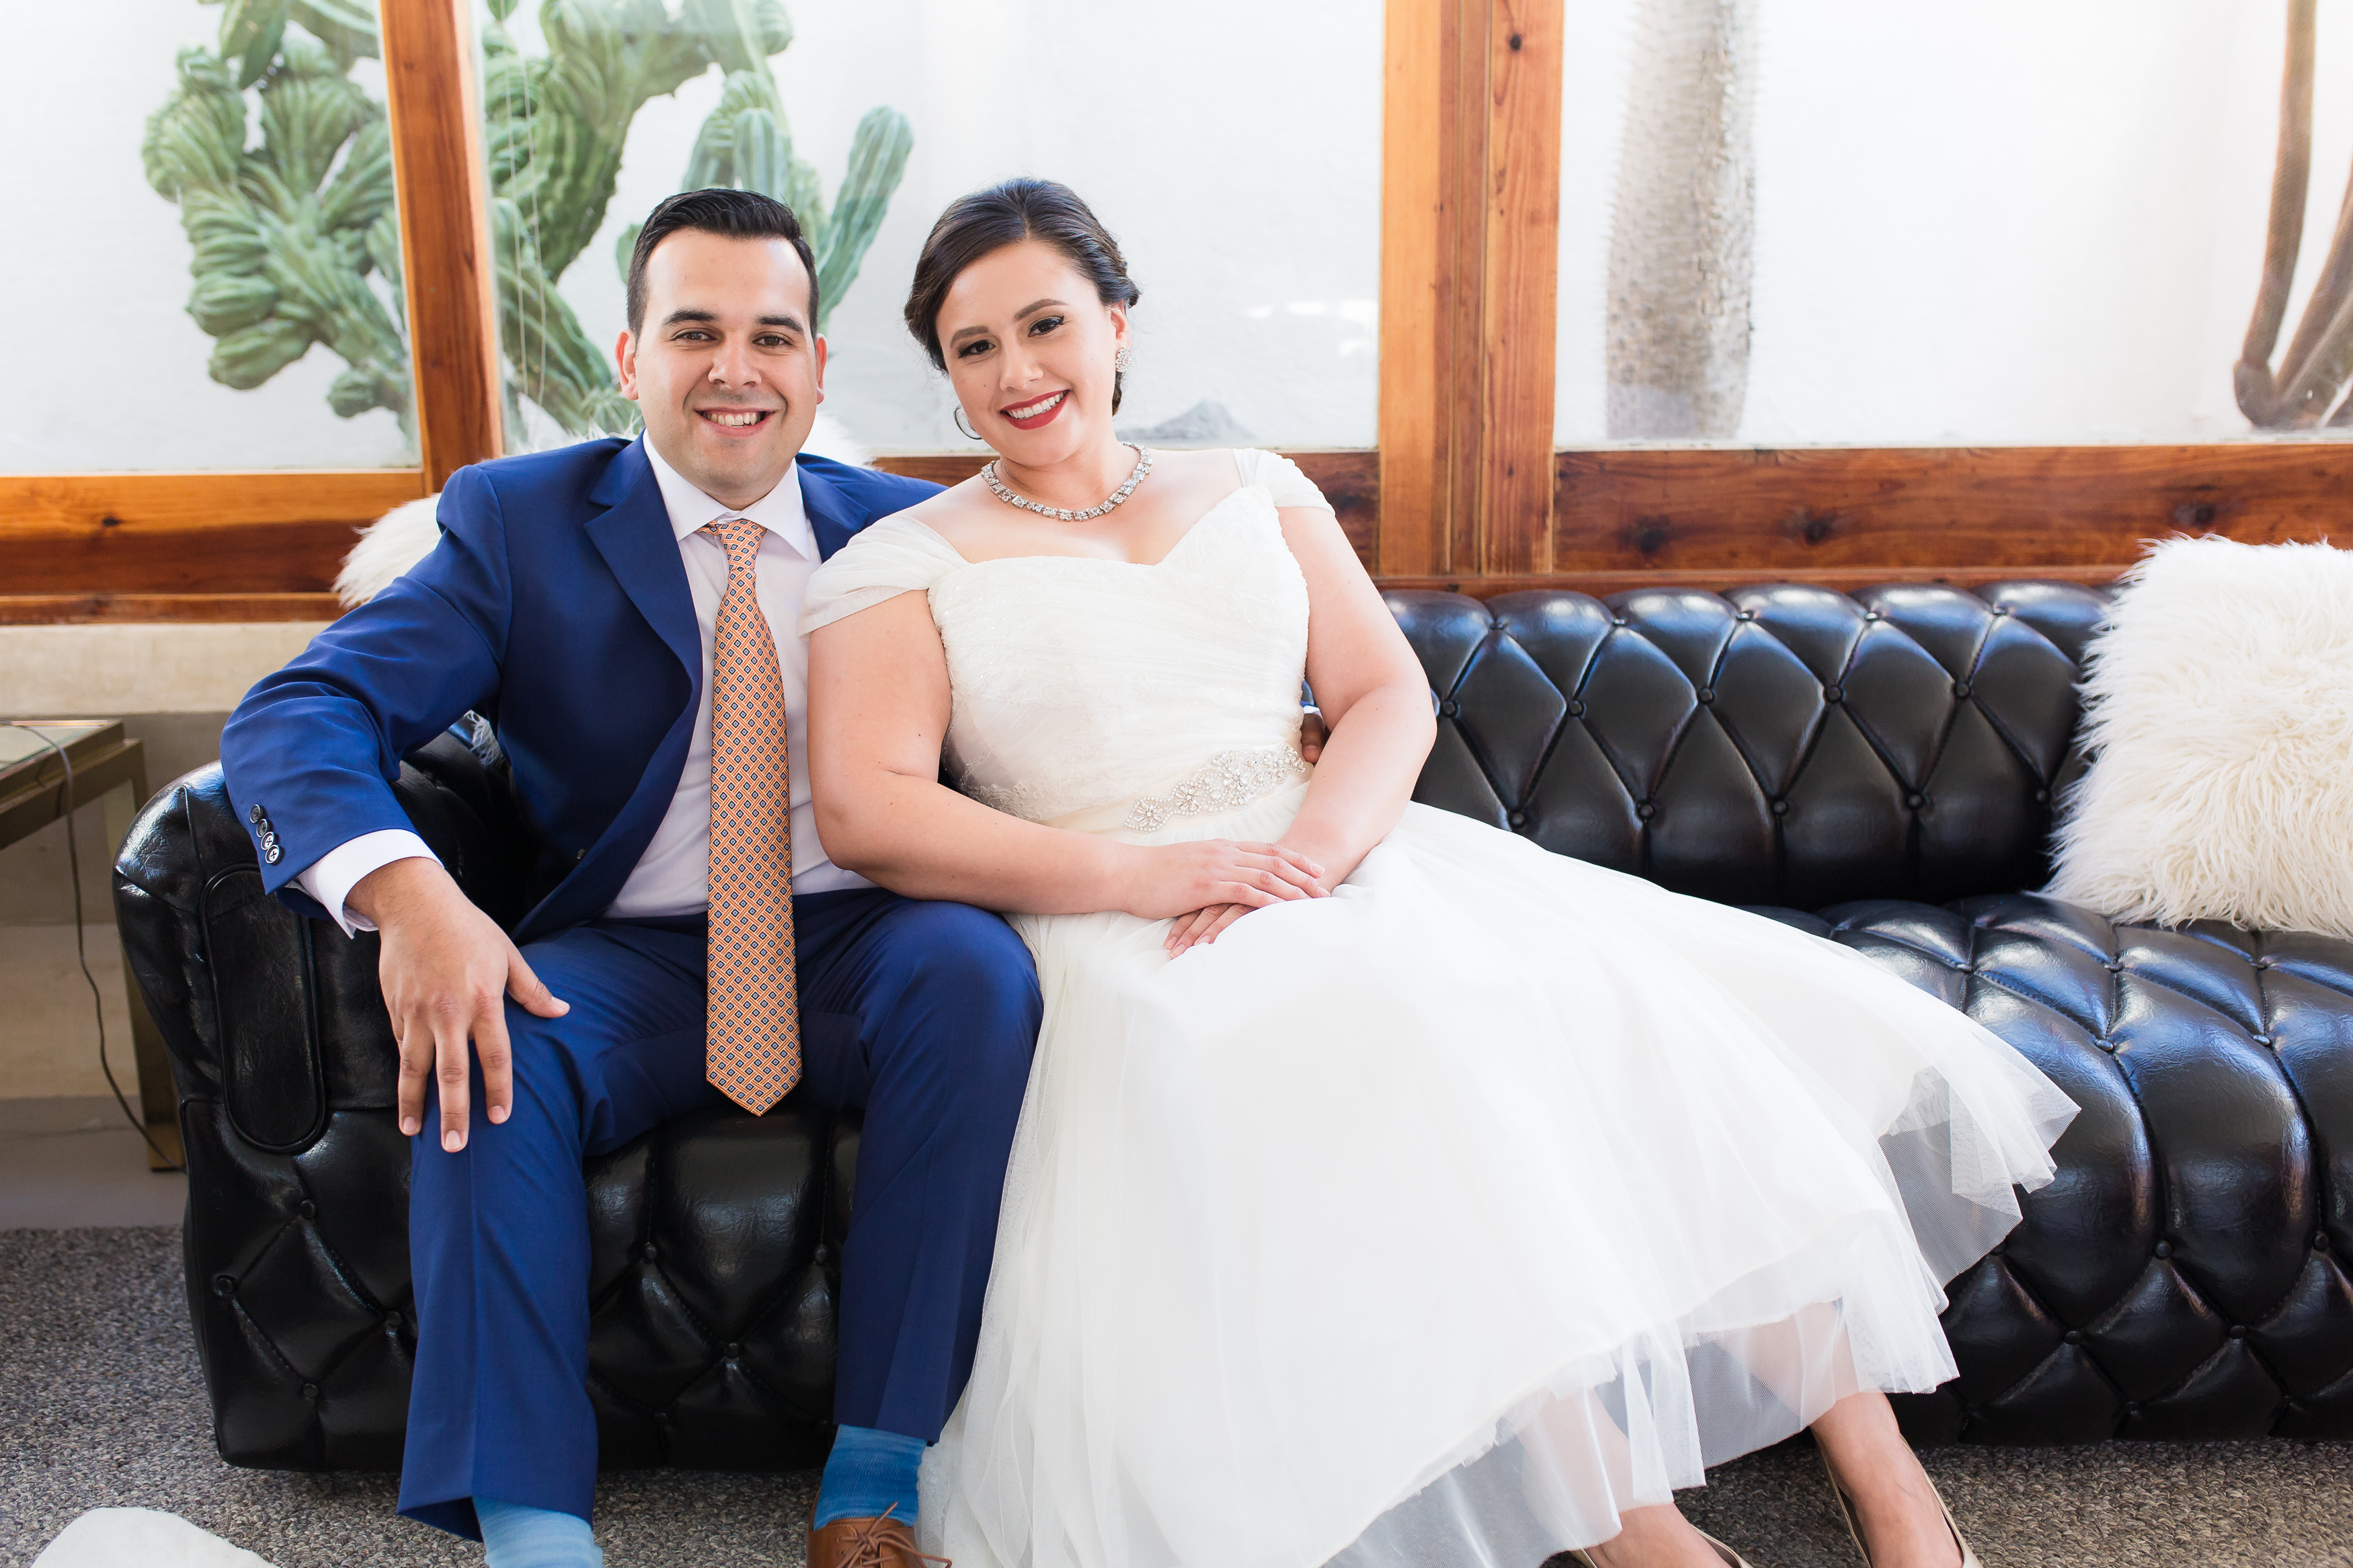 Sweethearts cuddle on leather couch in wedding attire, by Stefani Ciotti